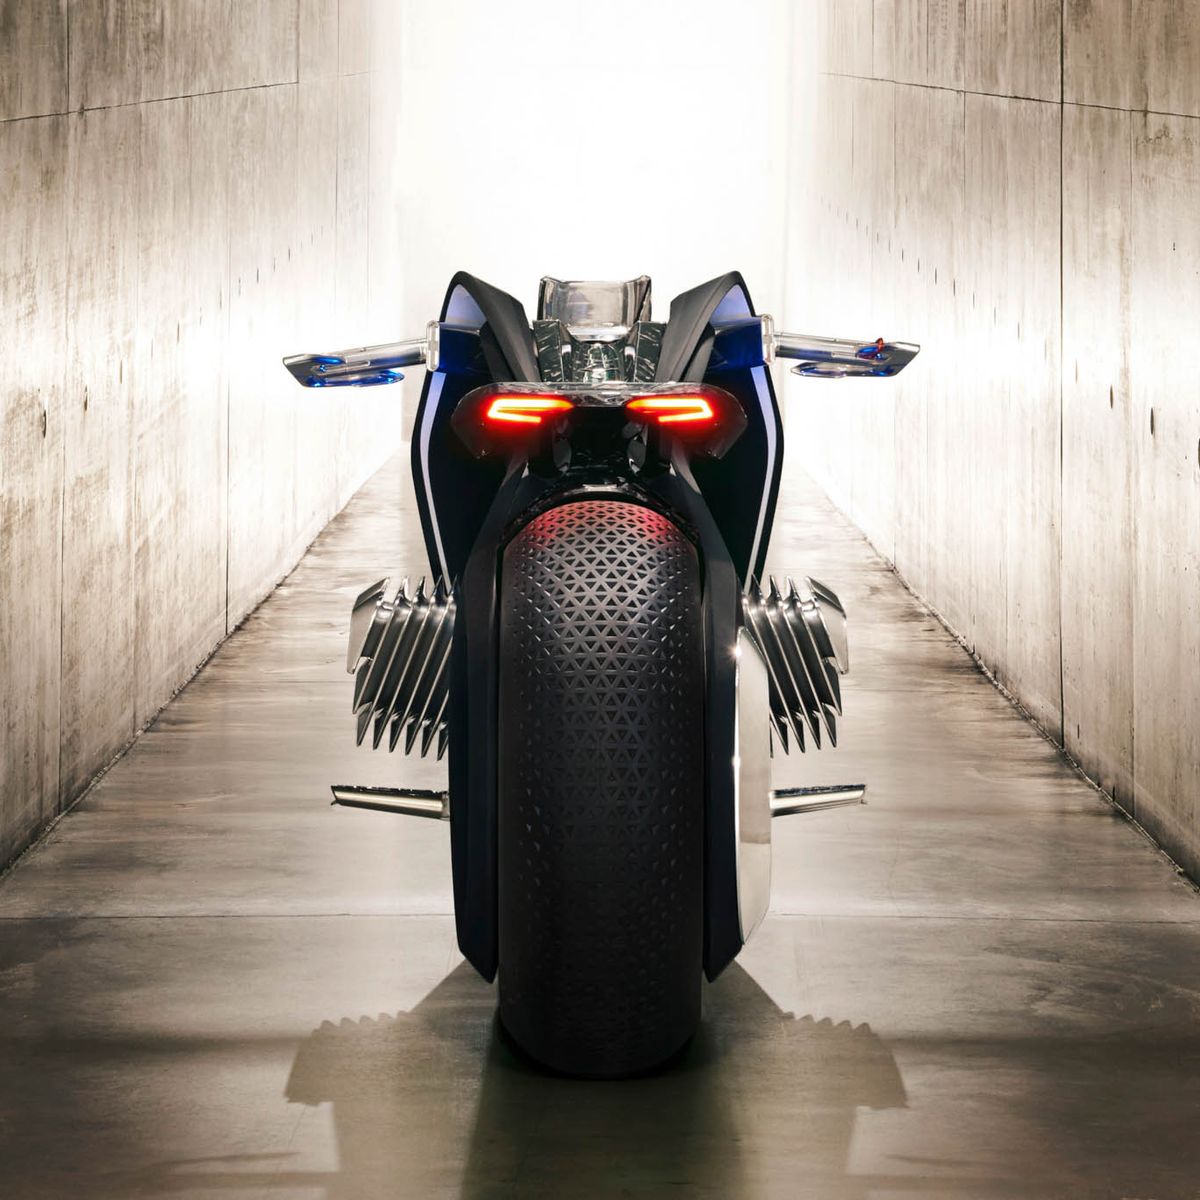 BMW Vision 100 Motorcycle: Two-Wheeling in the Next 100 Years – News – Car  and Driver